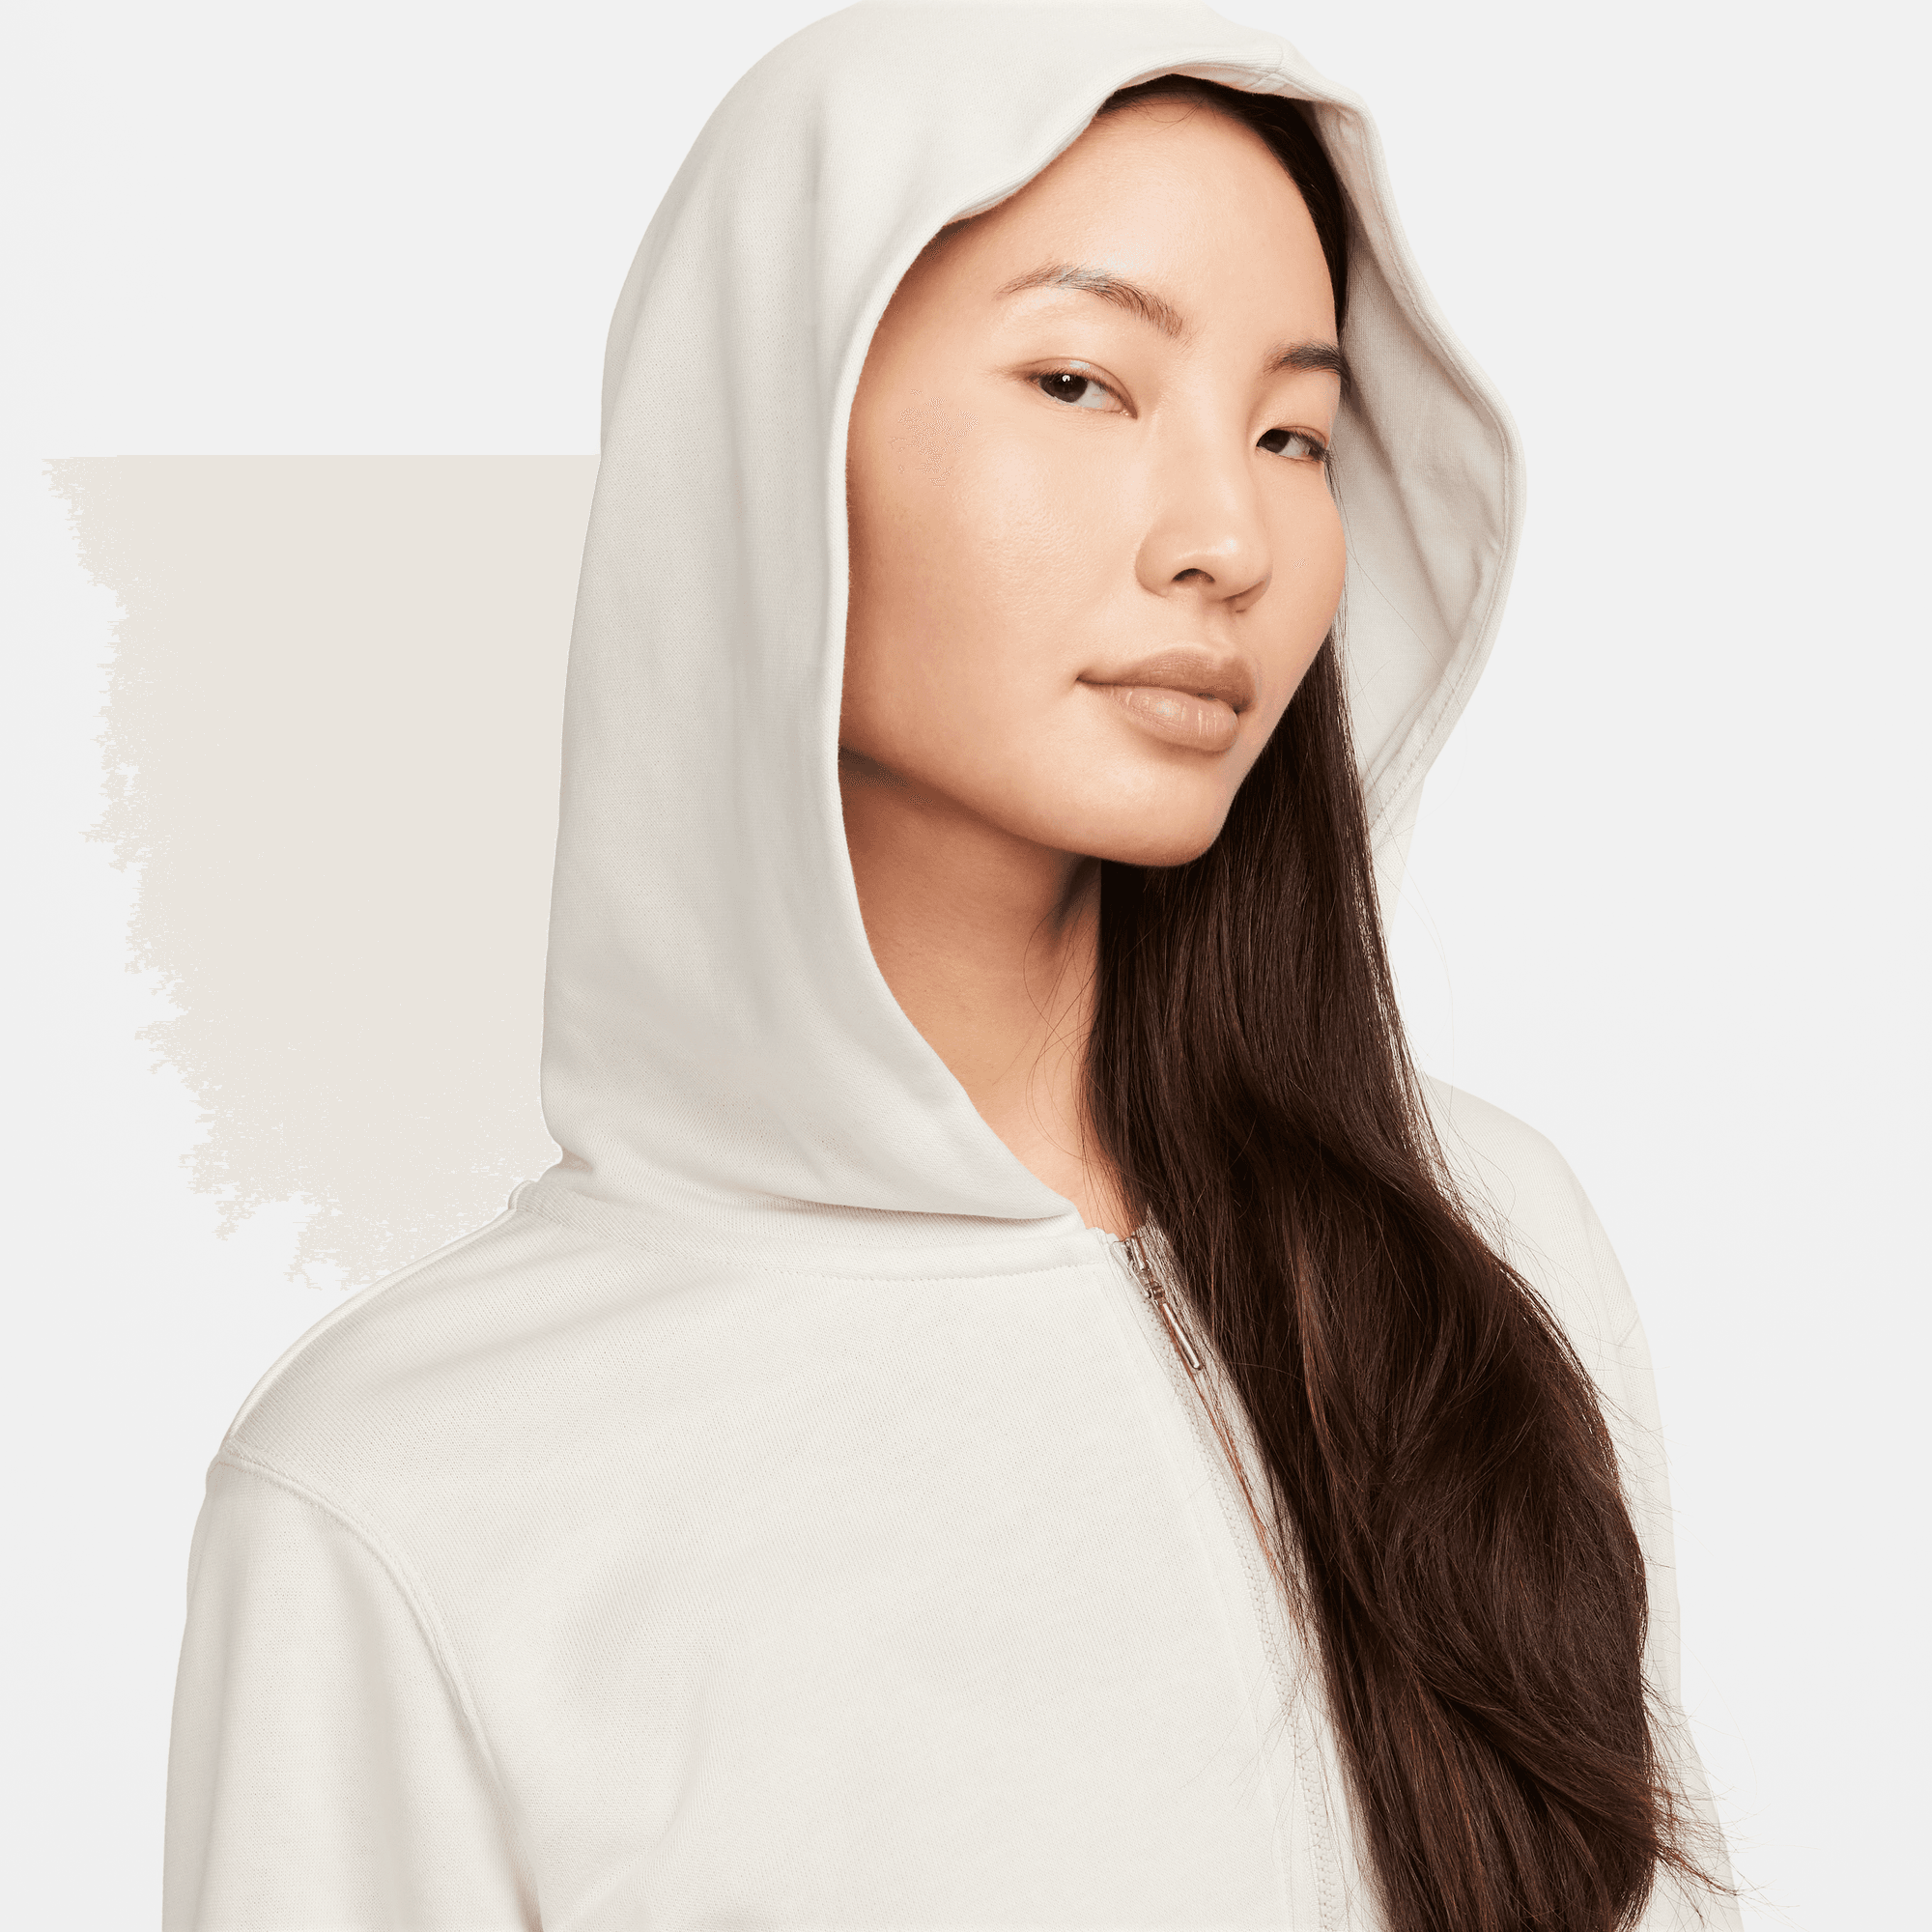 NIKE SPORTSWEAR CHILL TERRY WOMEN'S LOOSE FULL-ZIP FRENCH TERRY